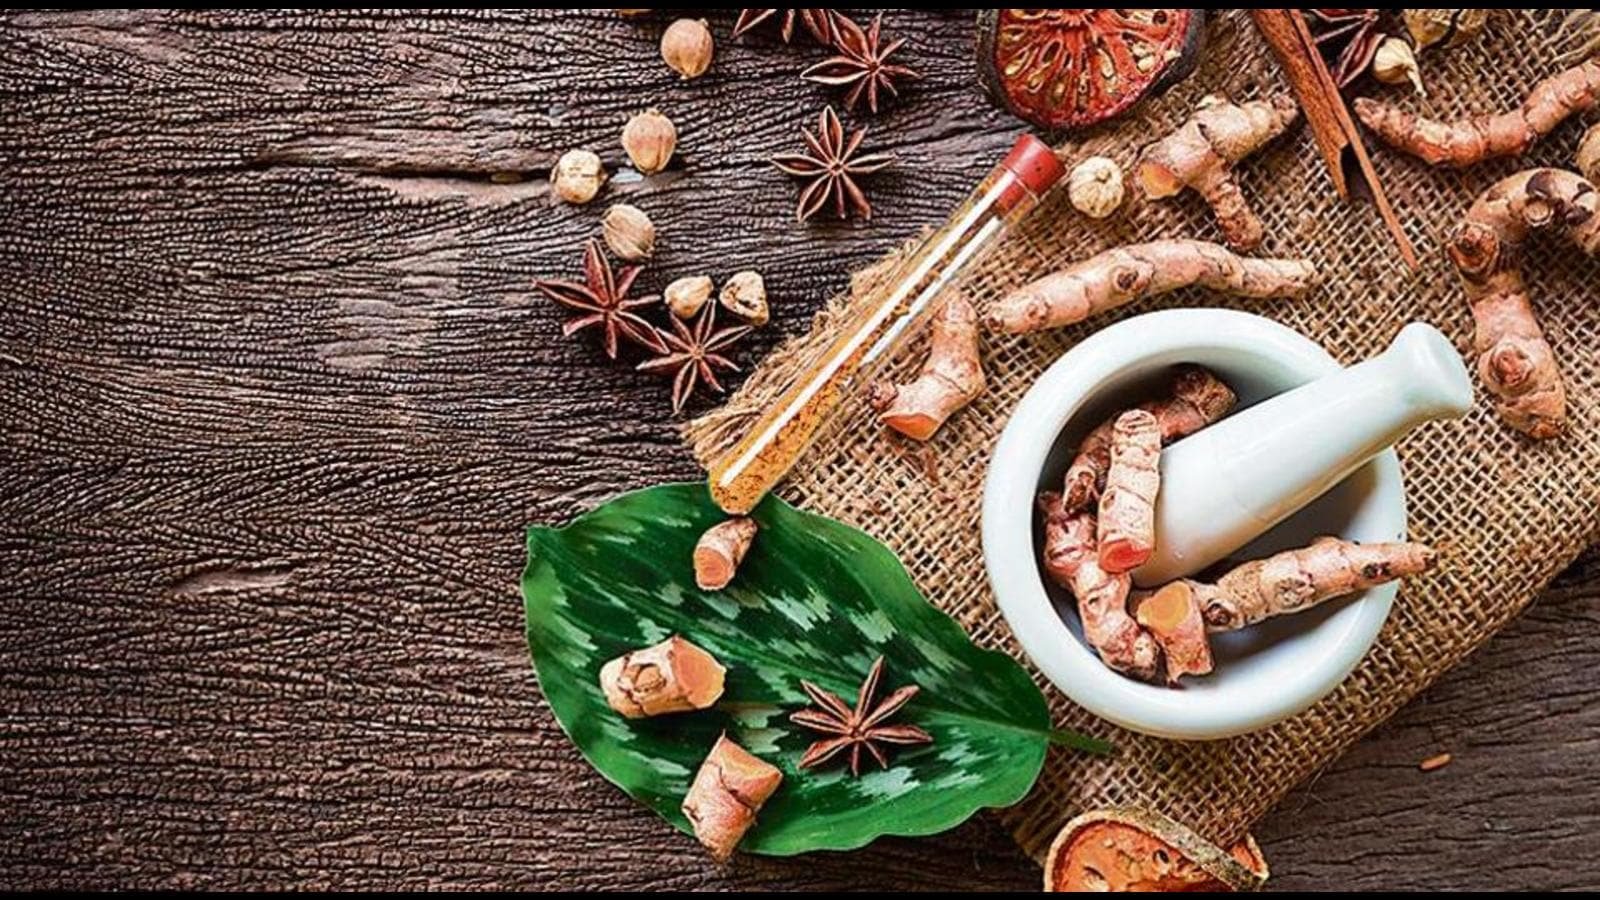 Immunity – Boost it with these 2 common spices